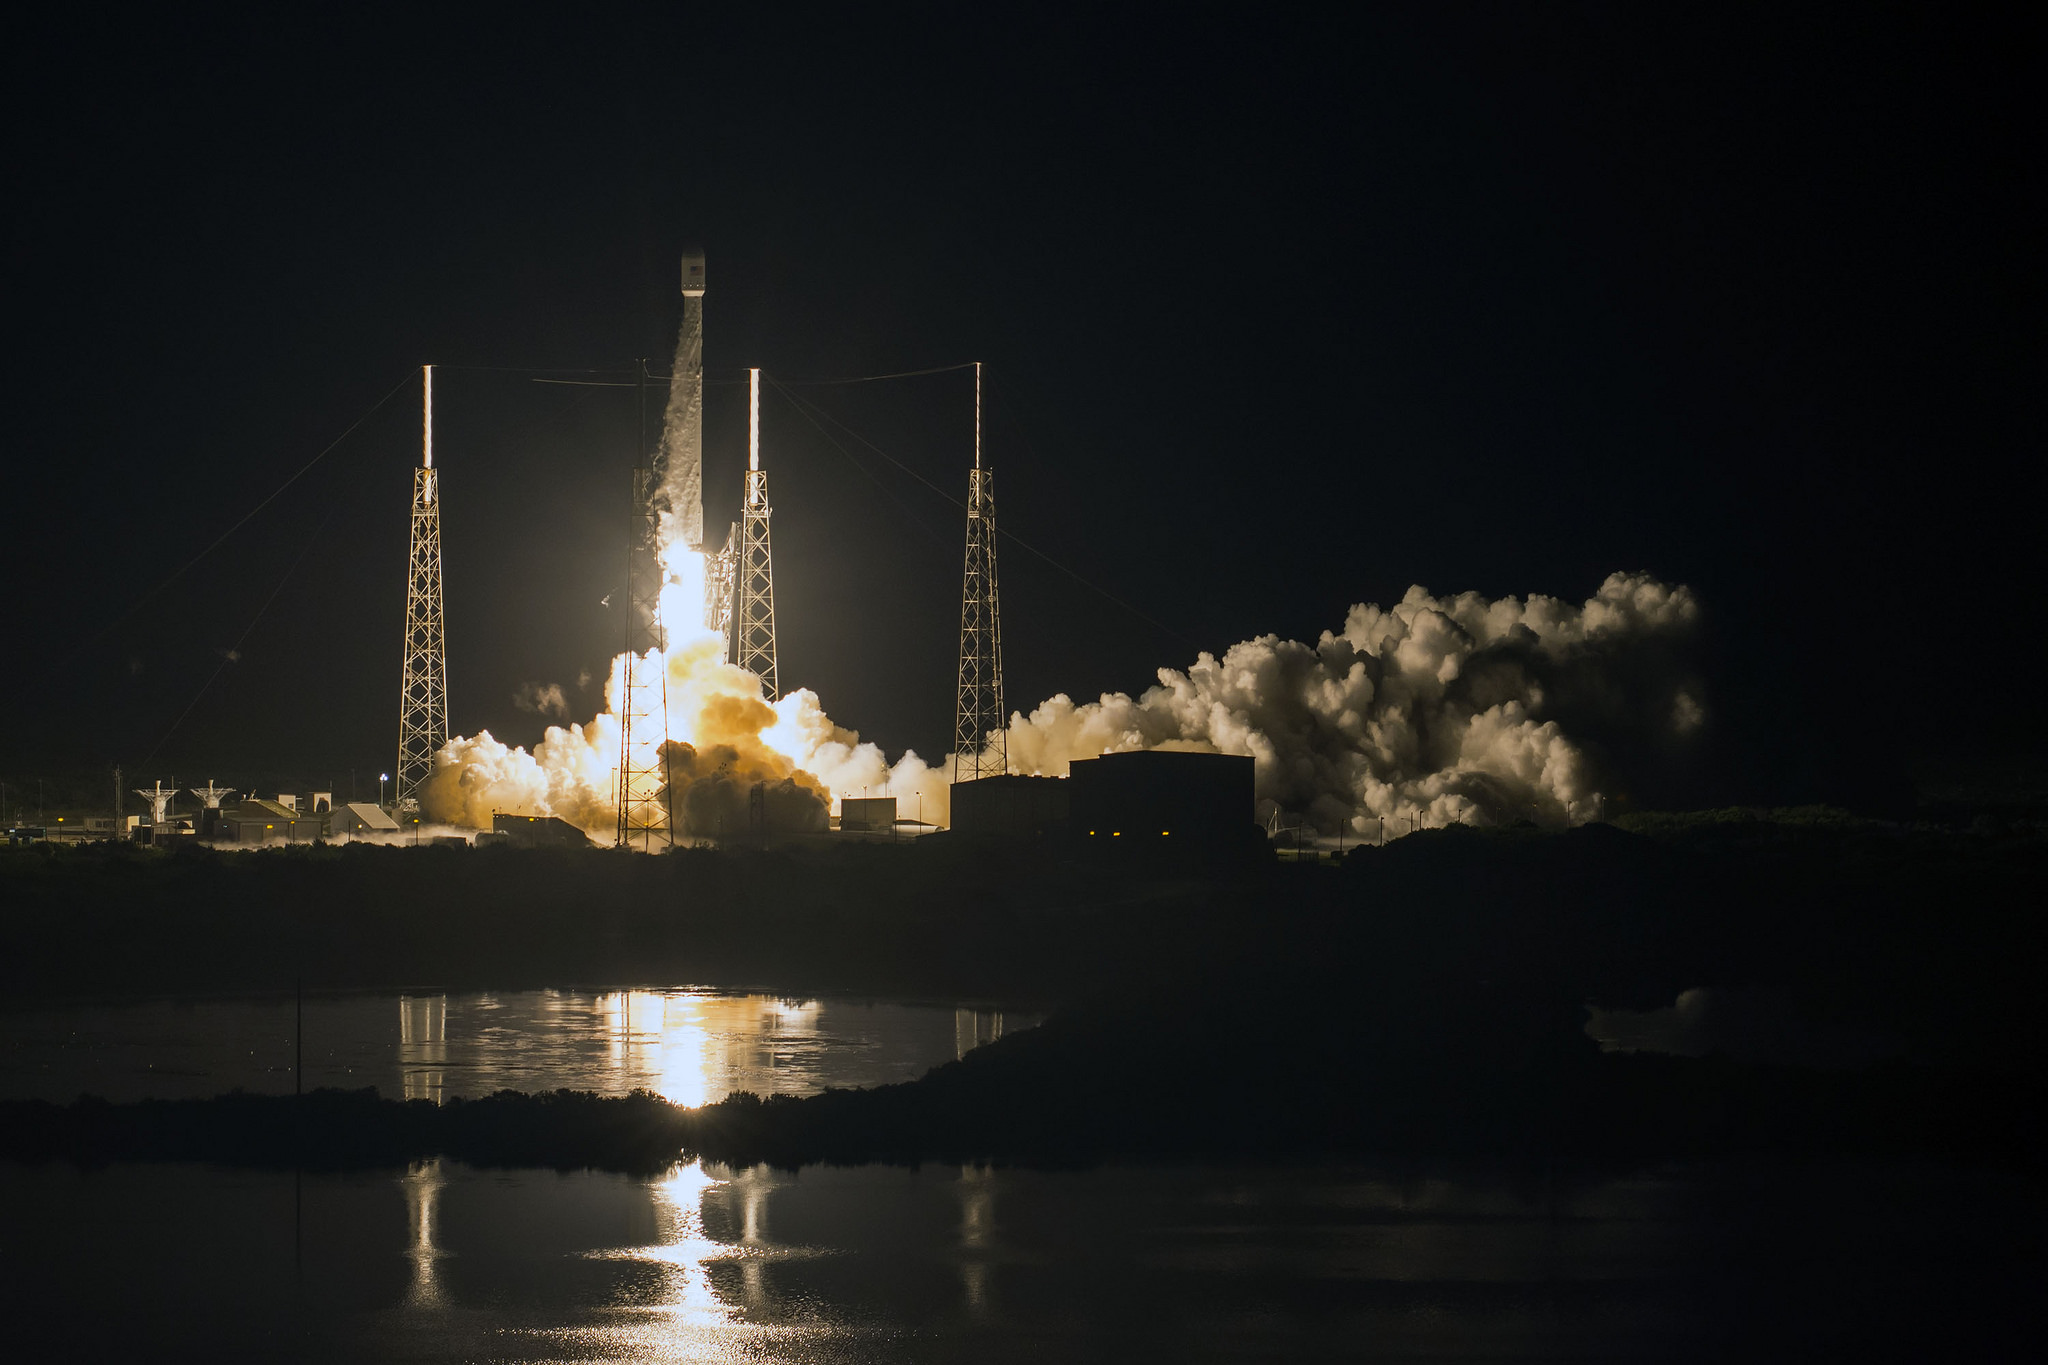 In Case You Missed It, SpaceX Successfully Launched Another Satellite